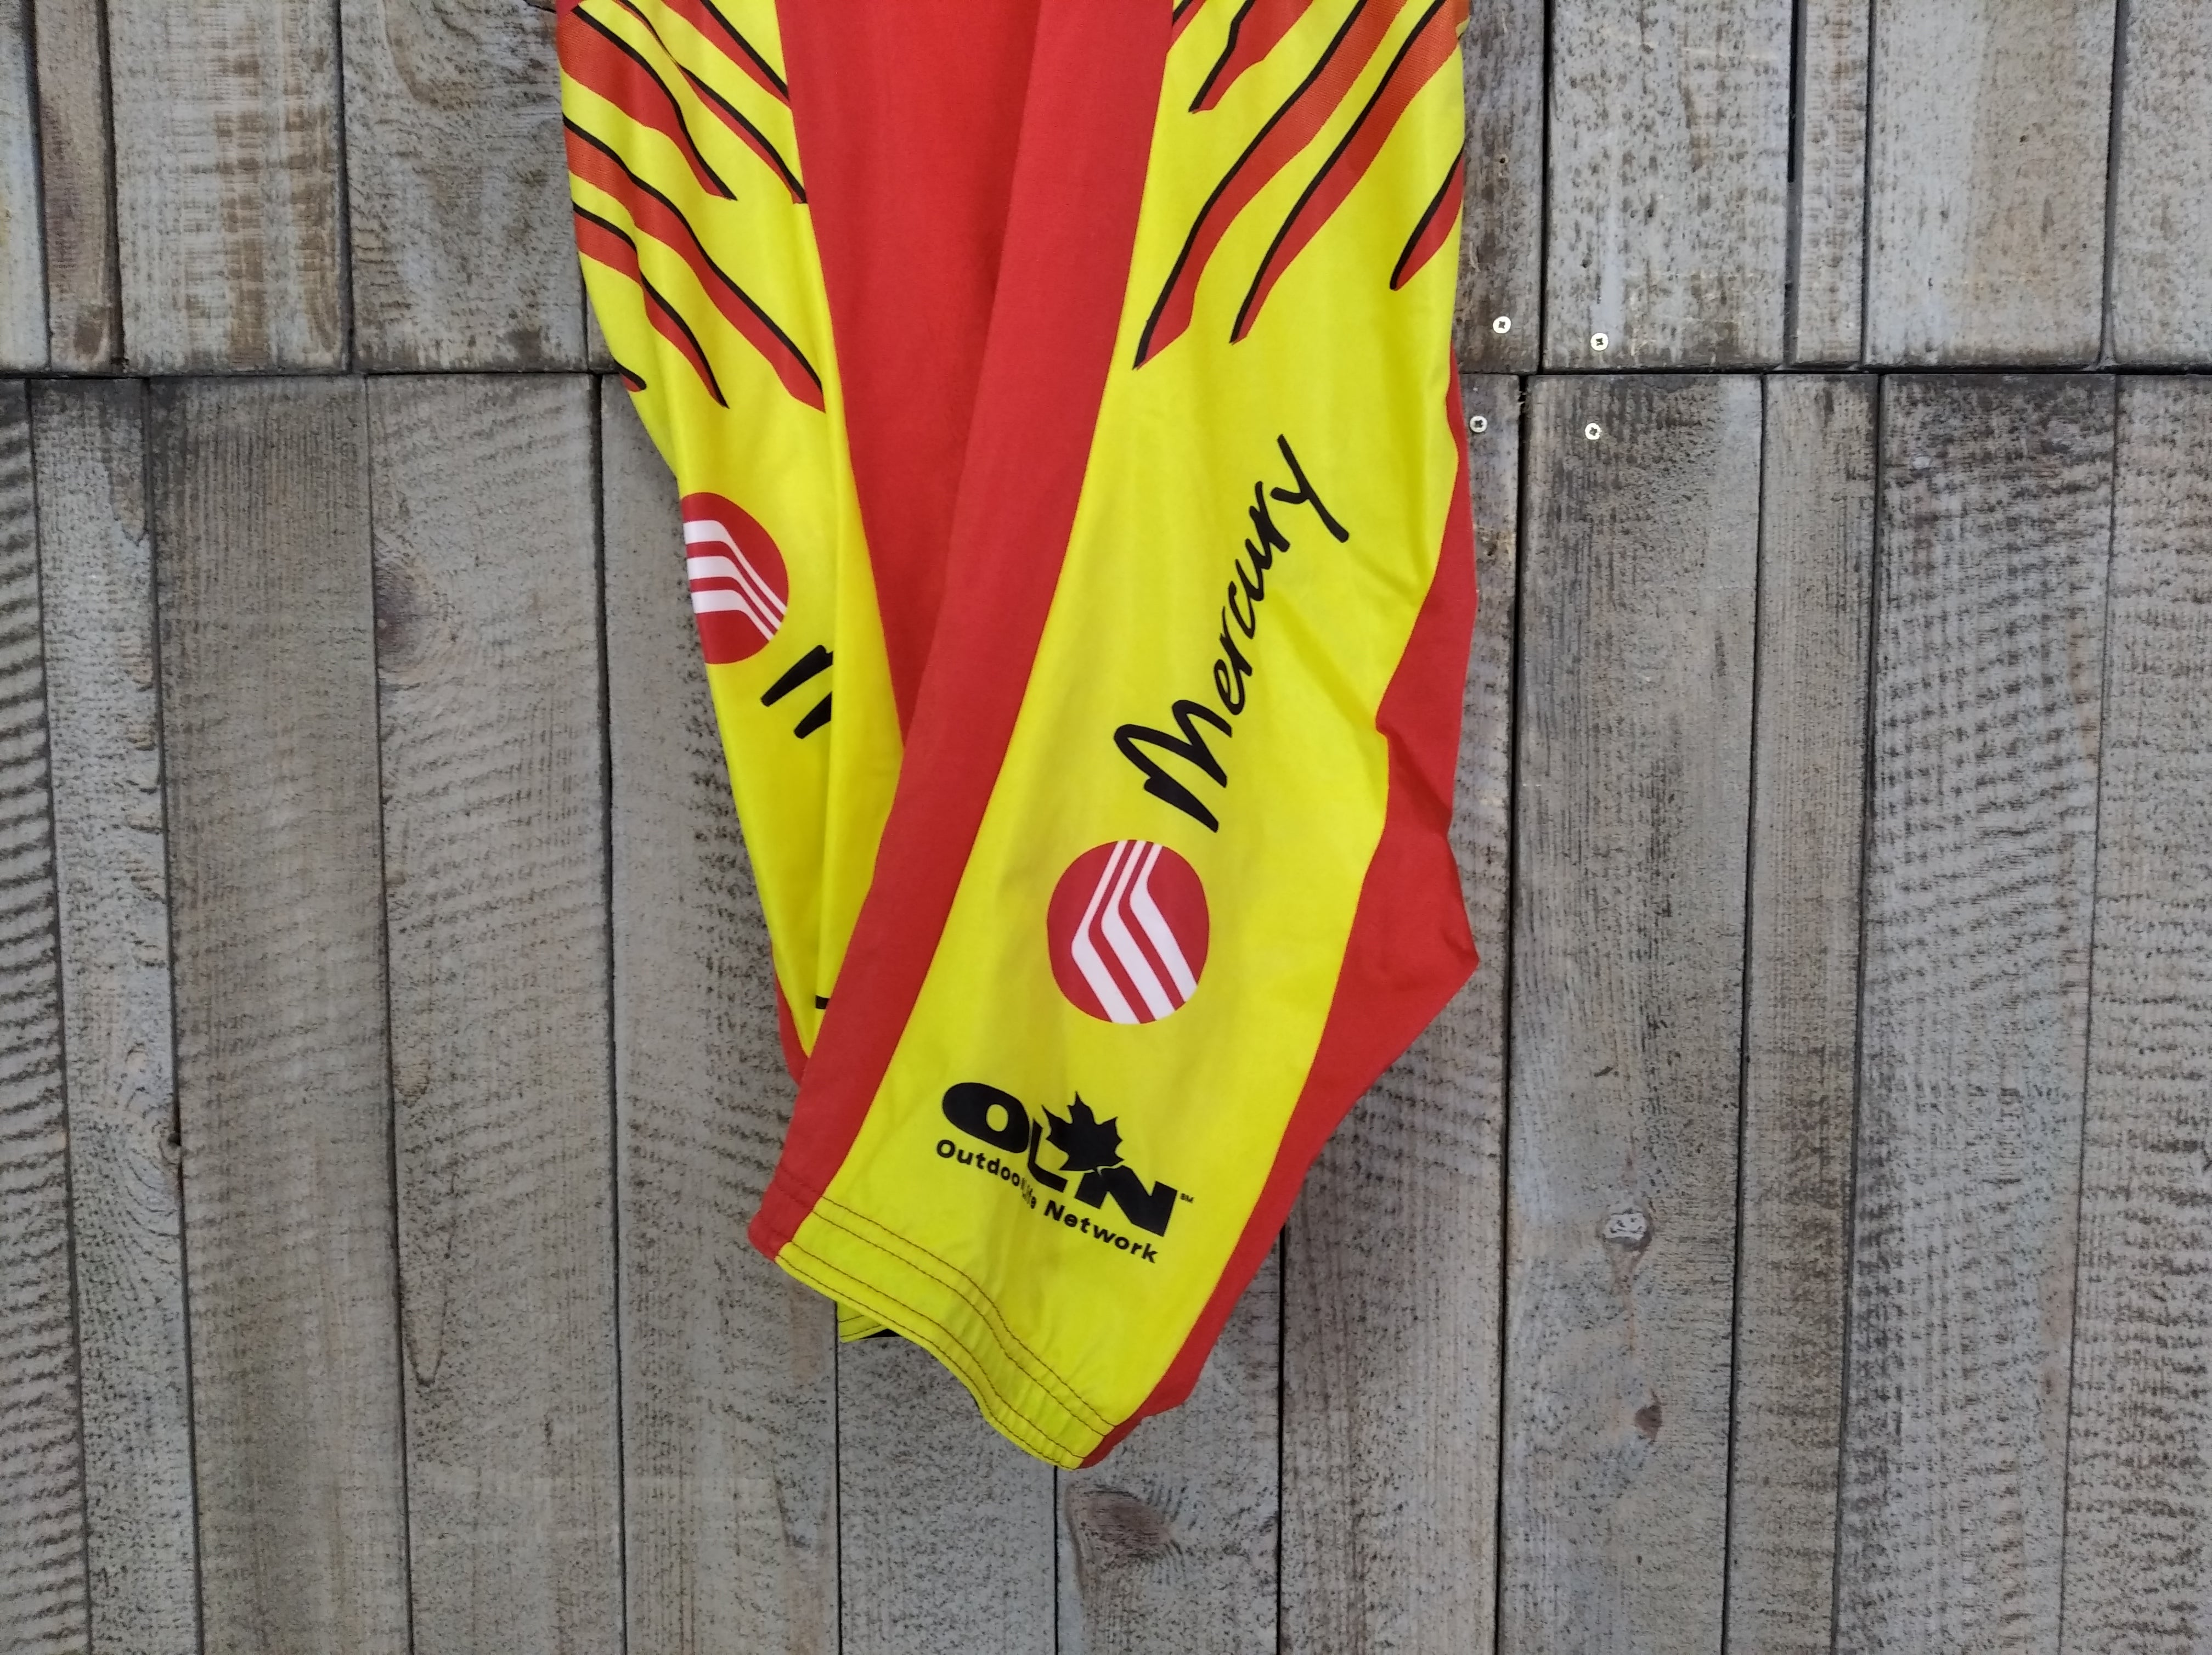 Mark Walters Signed 1998 Canadian National Championship Speedsuit by Giordana